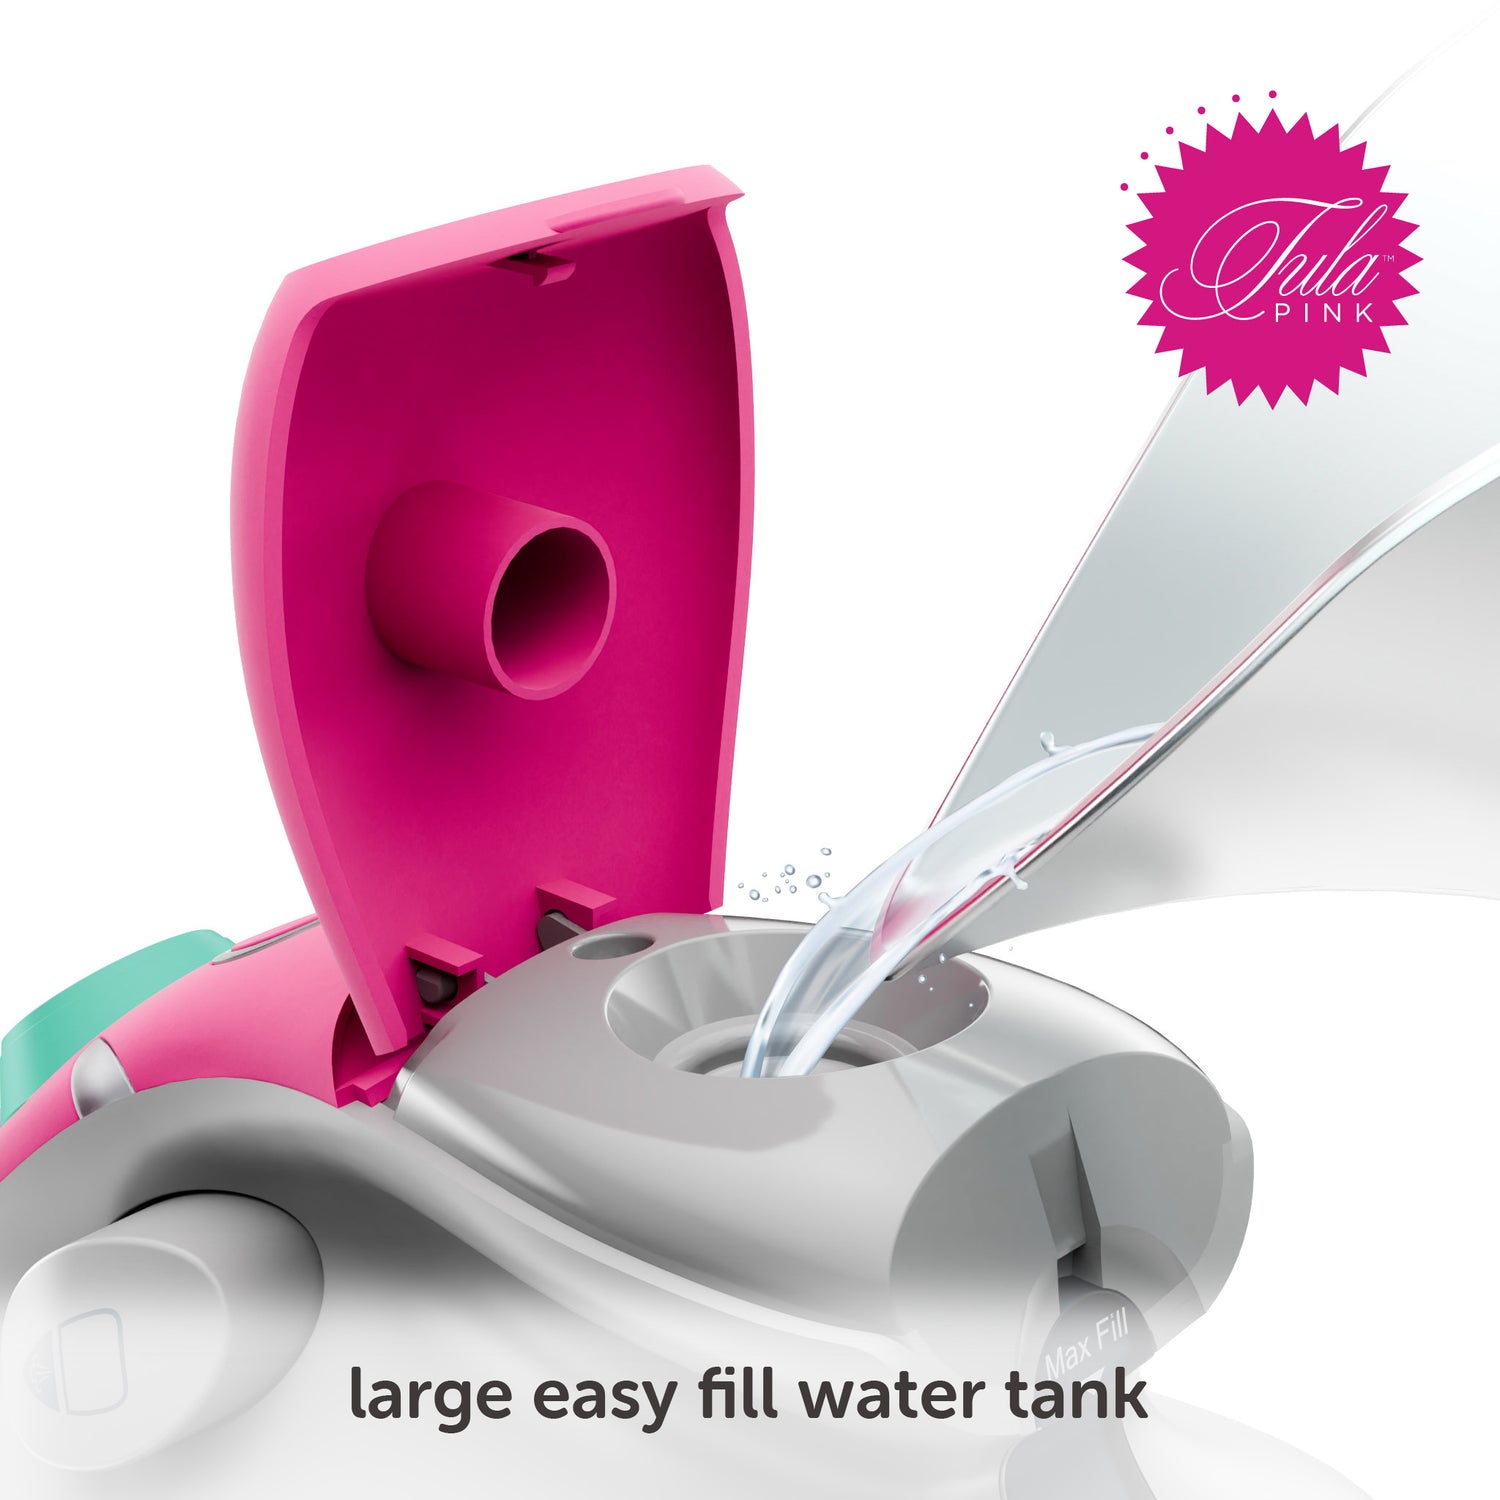 The M3Pro uses tap water and has an easy-to-fill water reservoir with a visible water level.